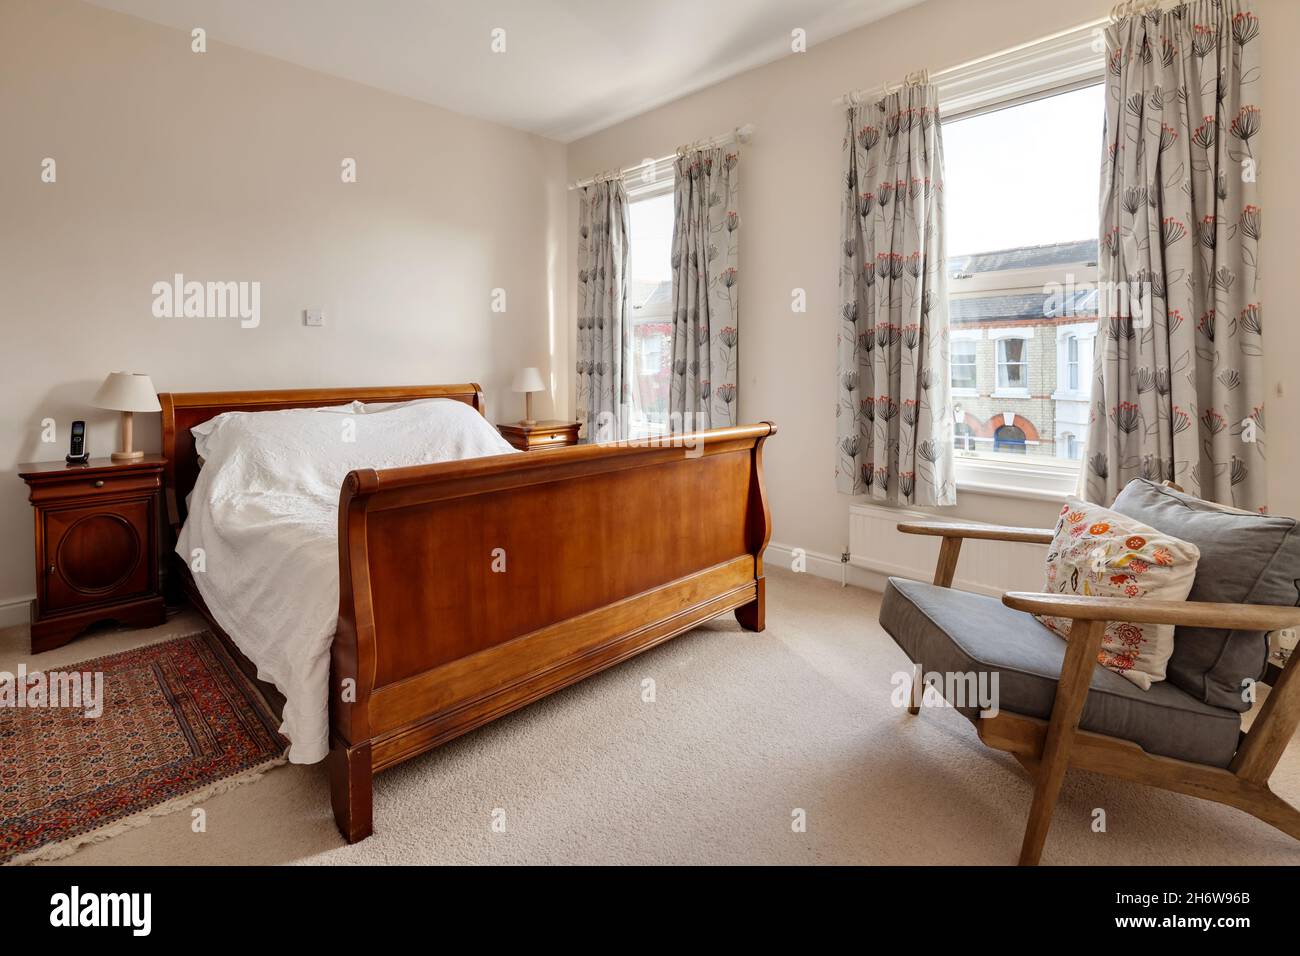 Cambridge, England - October 28 2019: Typical bedroom within British victorian era home with simple decor and traditional looking furniture. Stock Photo